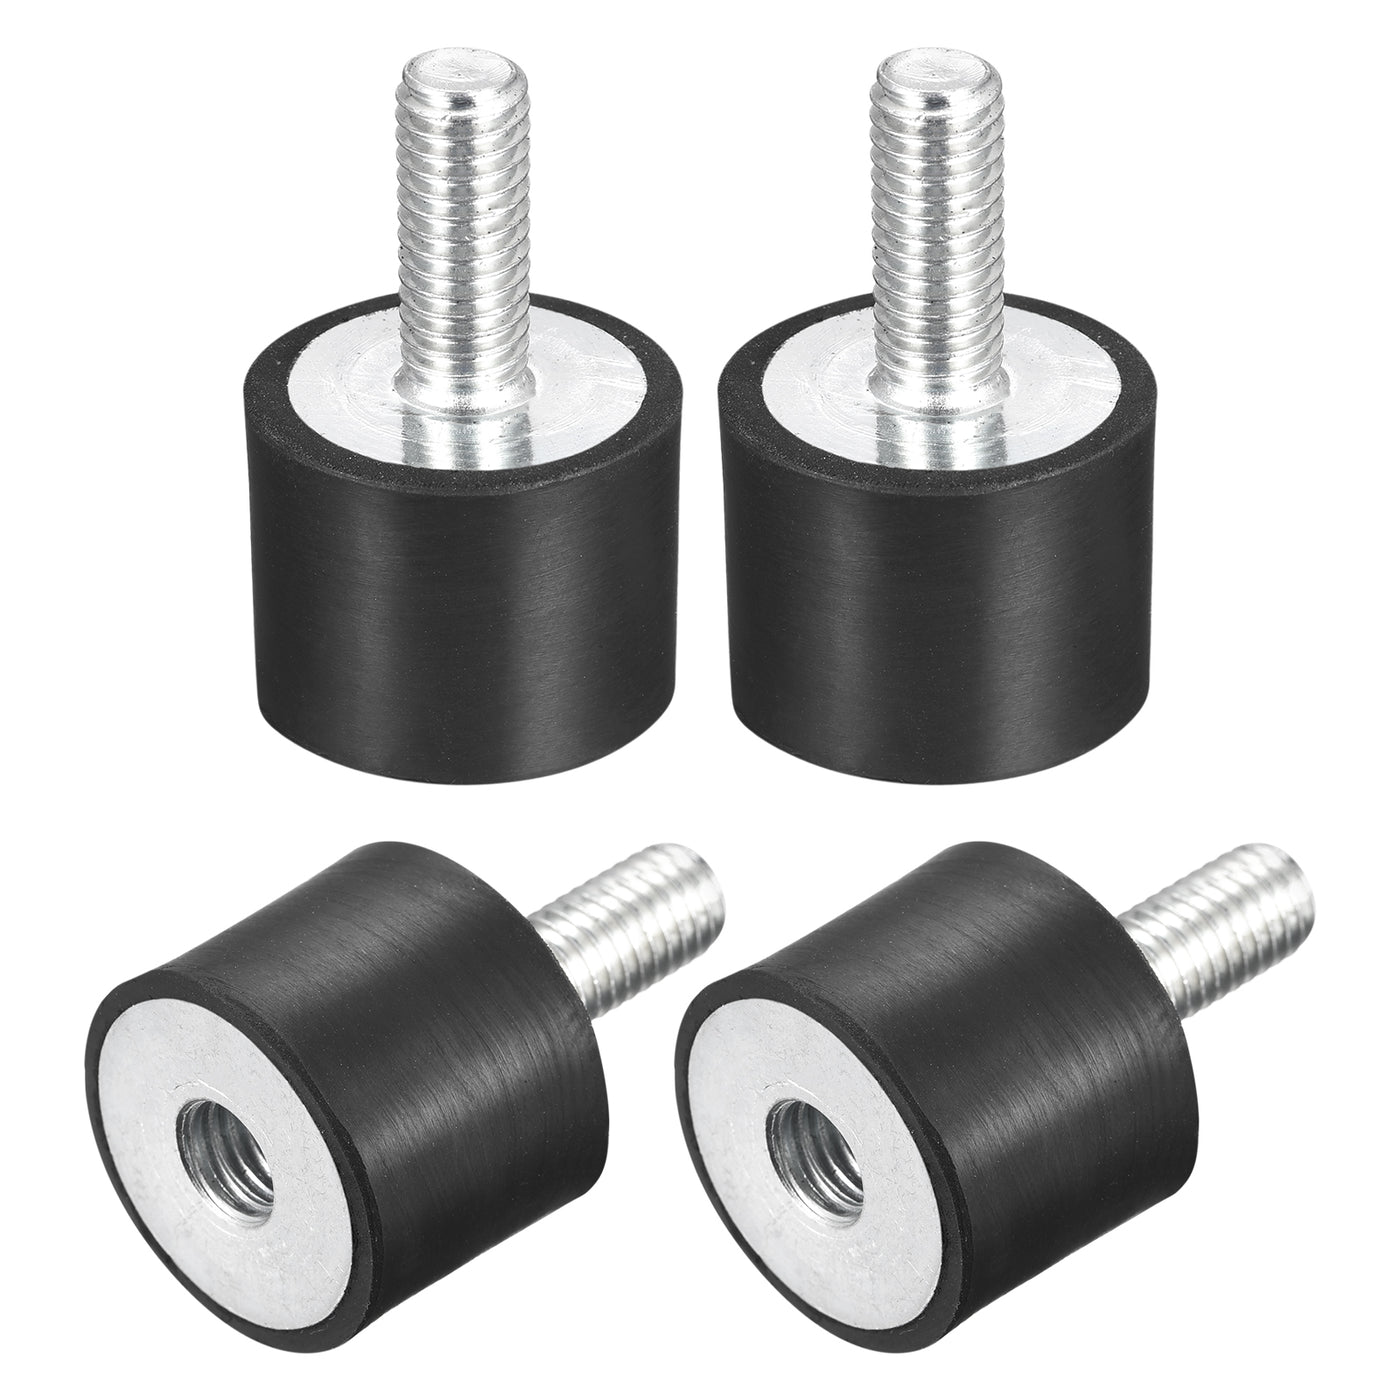 uxcell Uxcell Rubber Mounts 4pcs M8 Male/Female Vibration Isolator Shock Absorber D25mmxH20mm